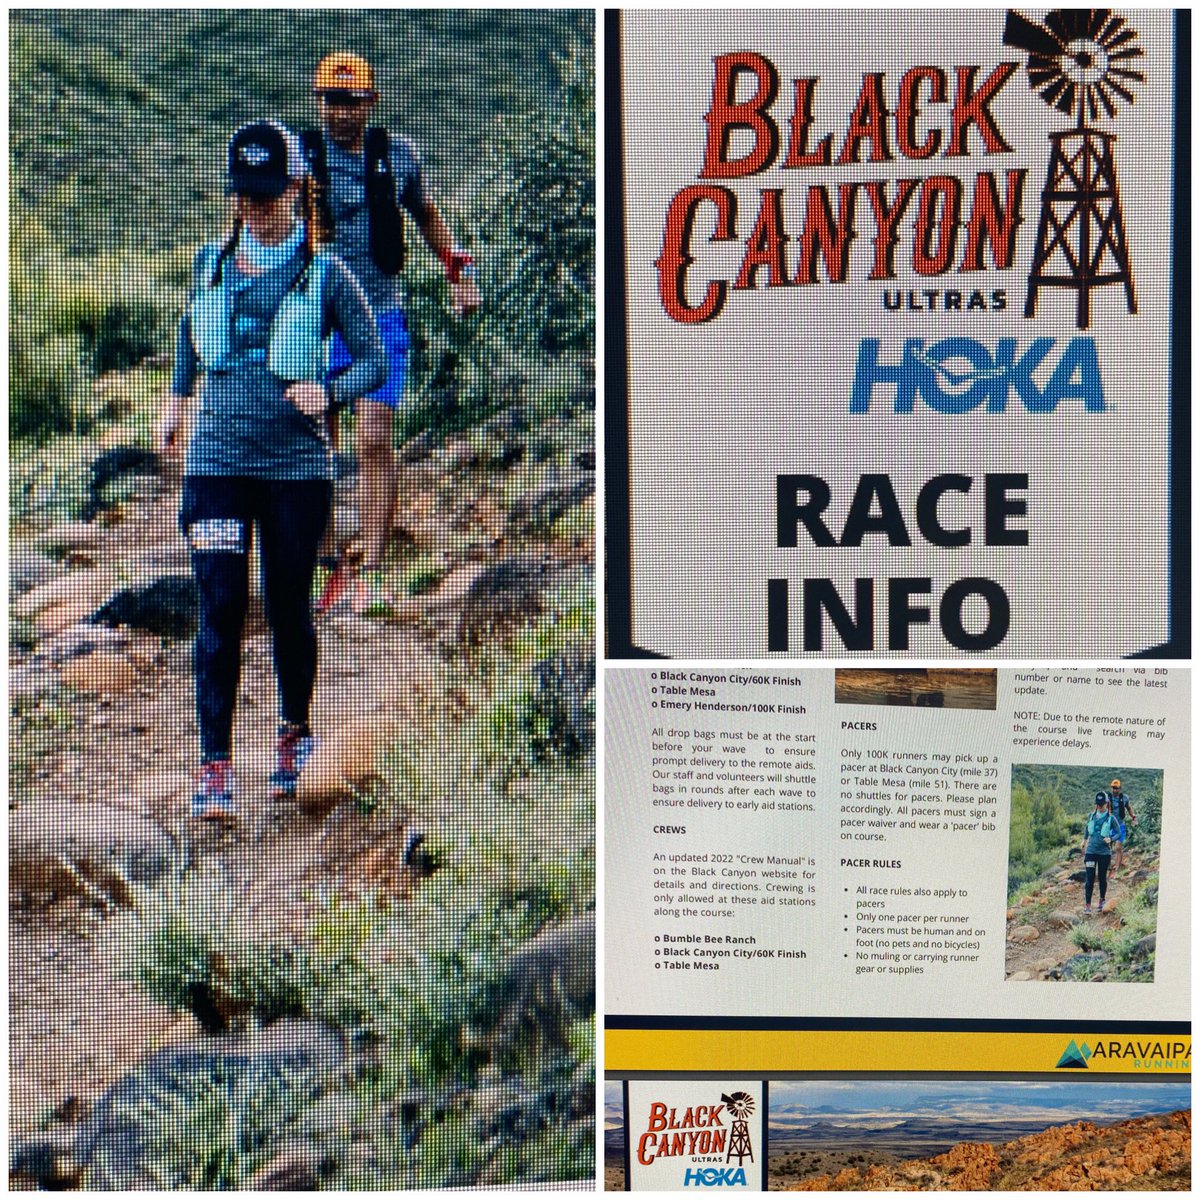 Lookie here!Planning out logistics with an athlete for #blackcanyonultras and look who I see in @aravaiparunning Runner’s Manual! If you look closely you can see Becky sporting a @sundogrunning hat;) #sundogrunning #running #trailrunning #trailrunner #ultrarunning #ultrarunner